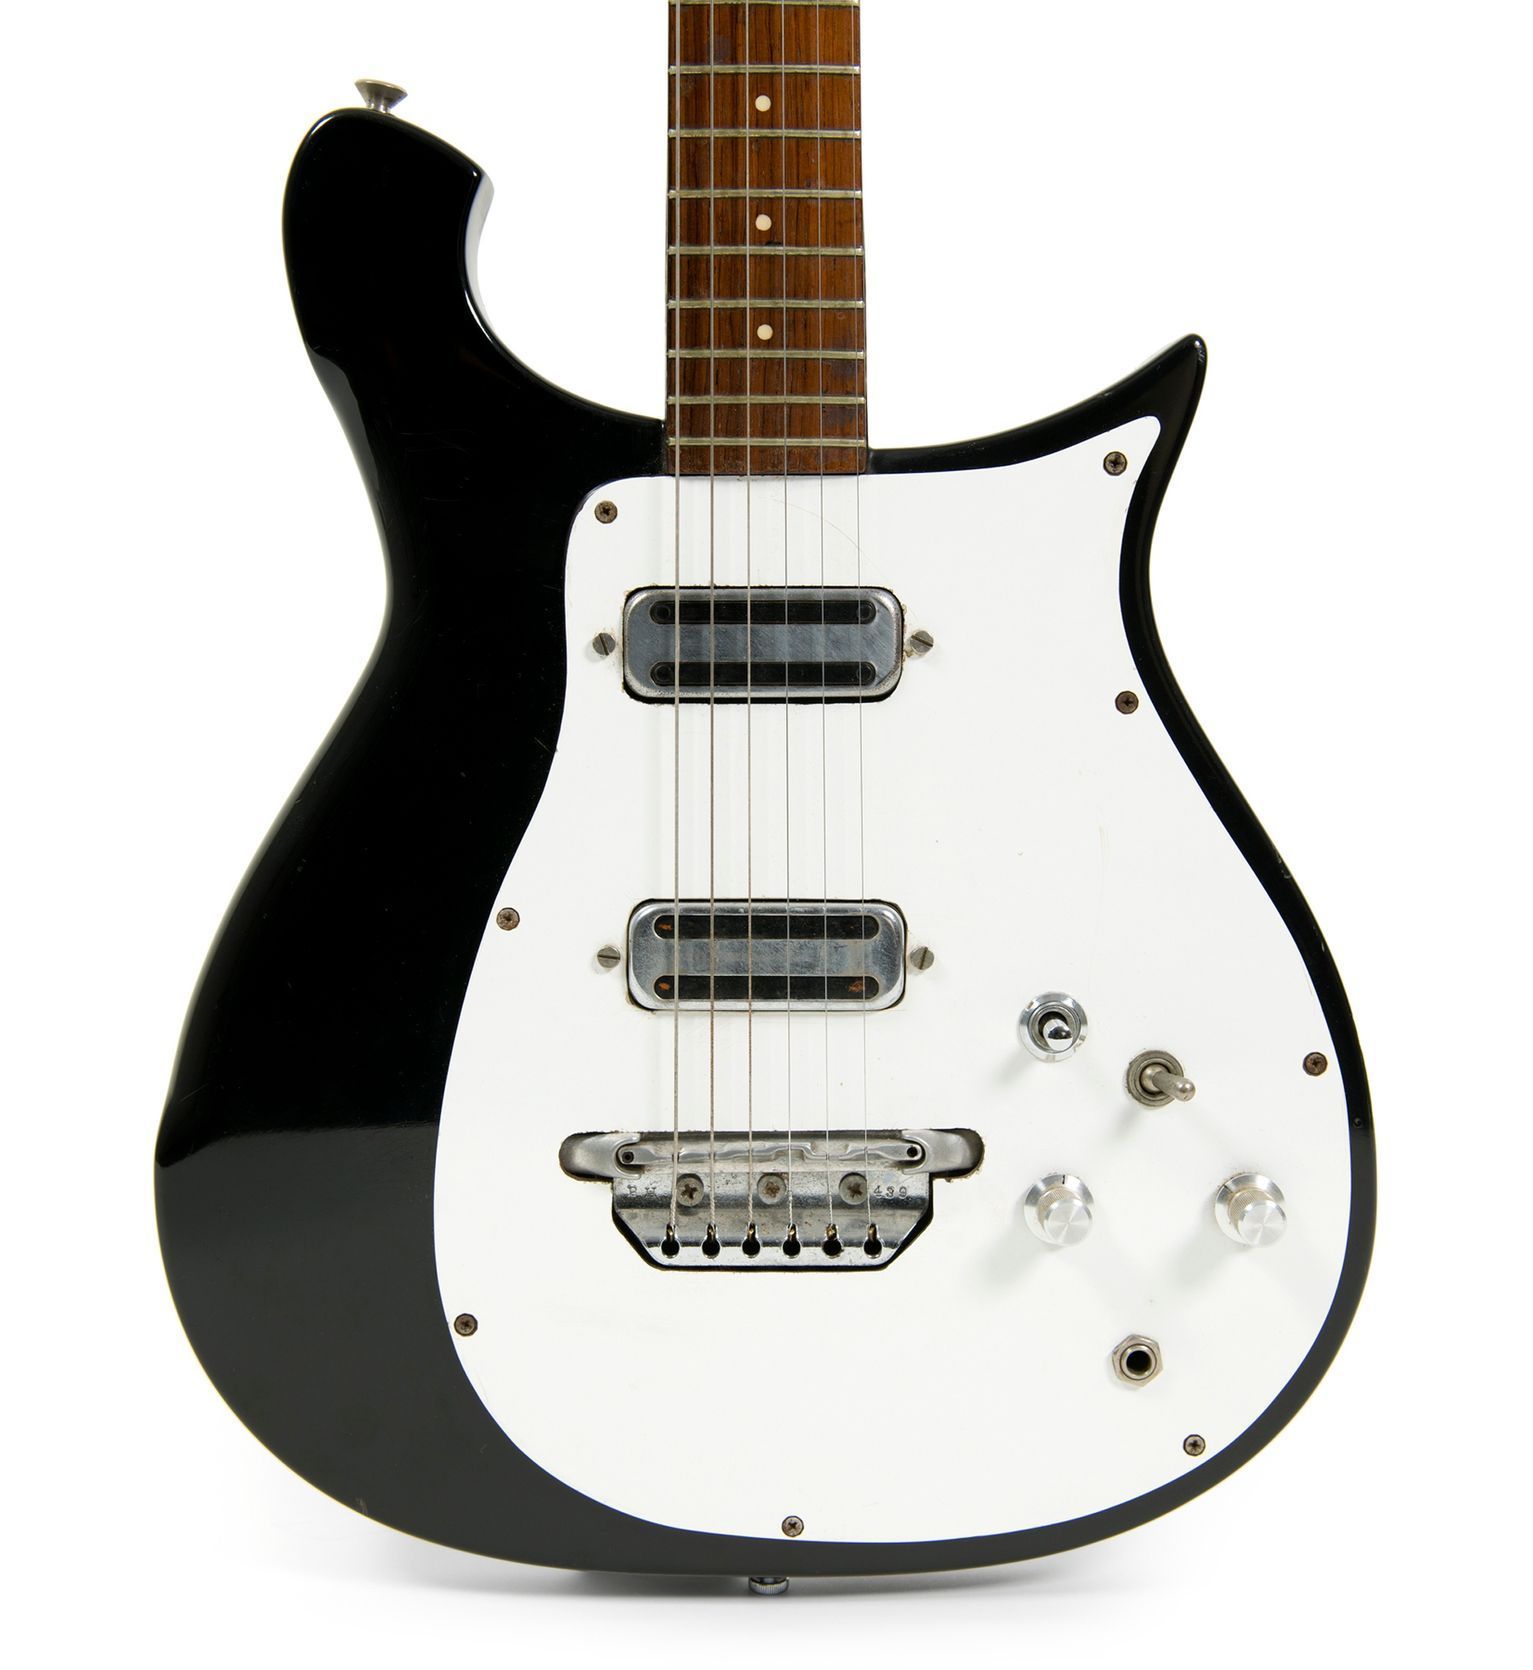 George Harrison's black-and-white 1962 Rickenbacker 425 electric guitar is shown in this handout photo provided by Julien's Auctions